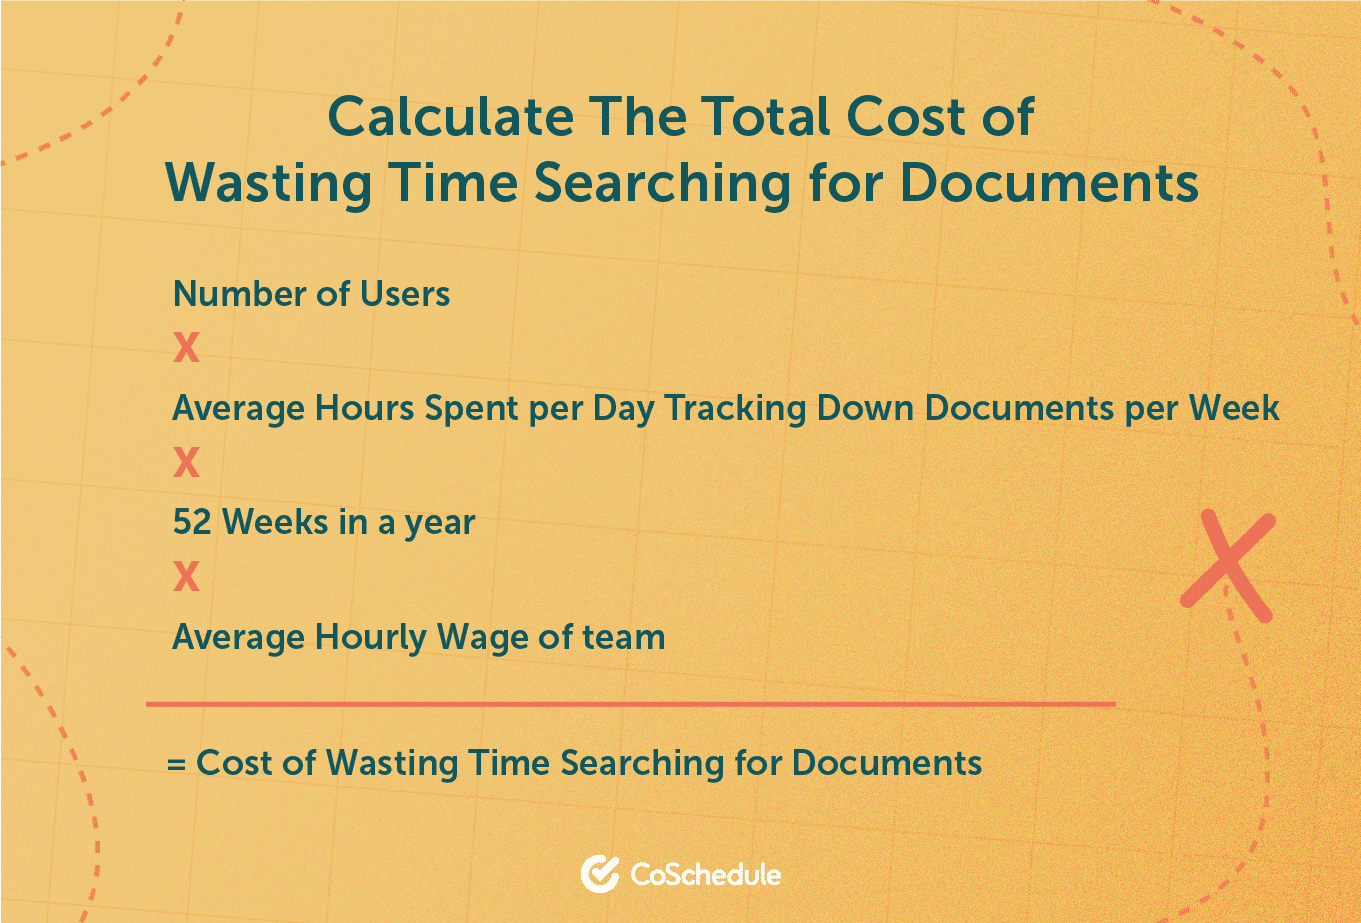 Calculate the cost of the time wasted searching for lost documents.